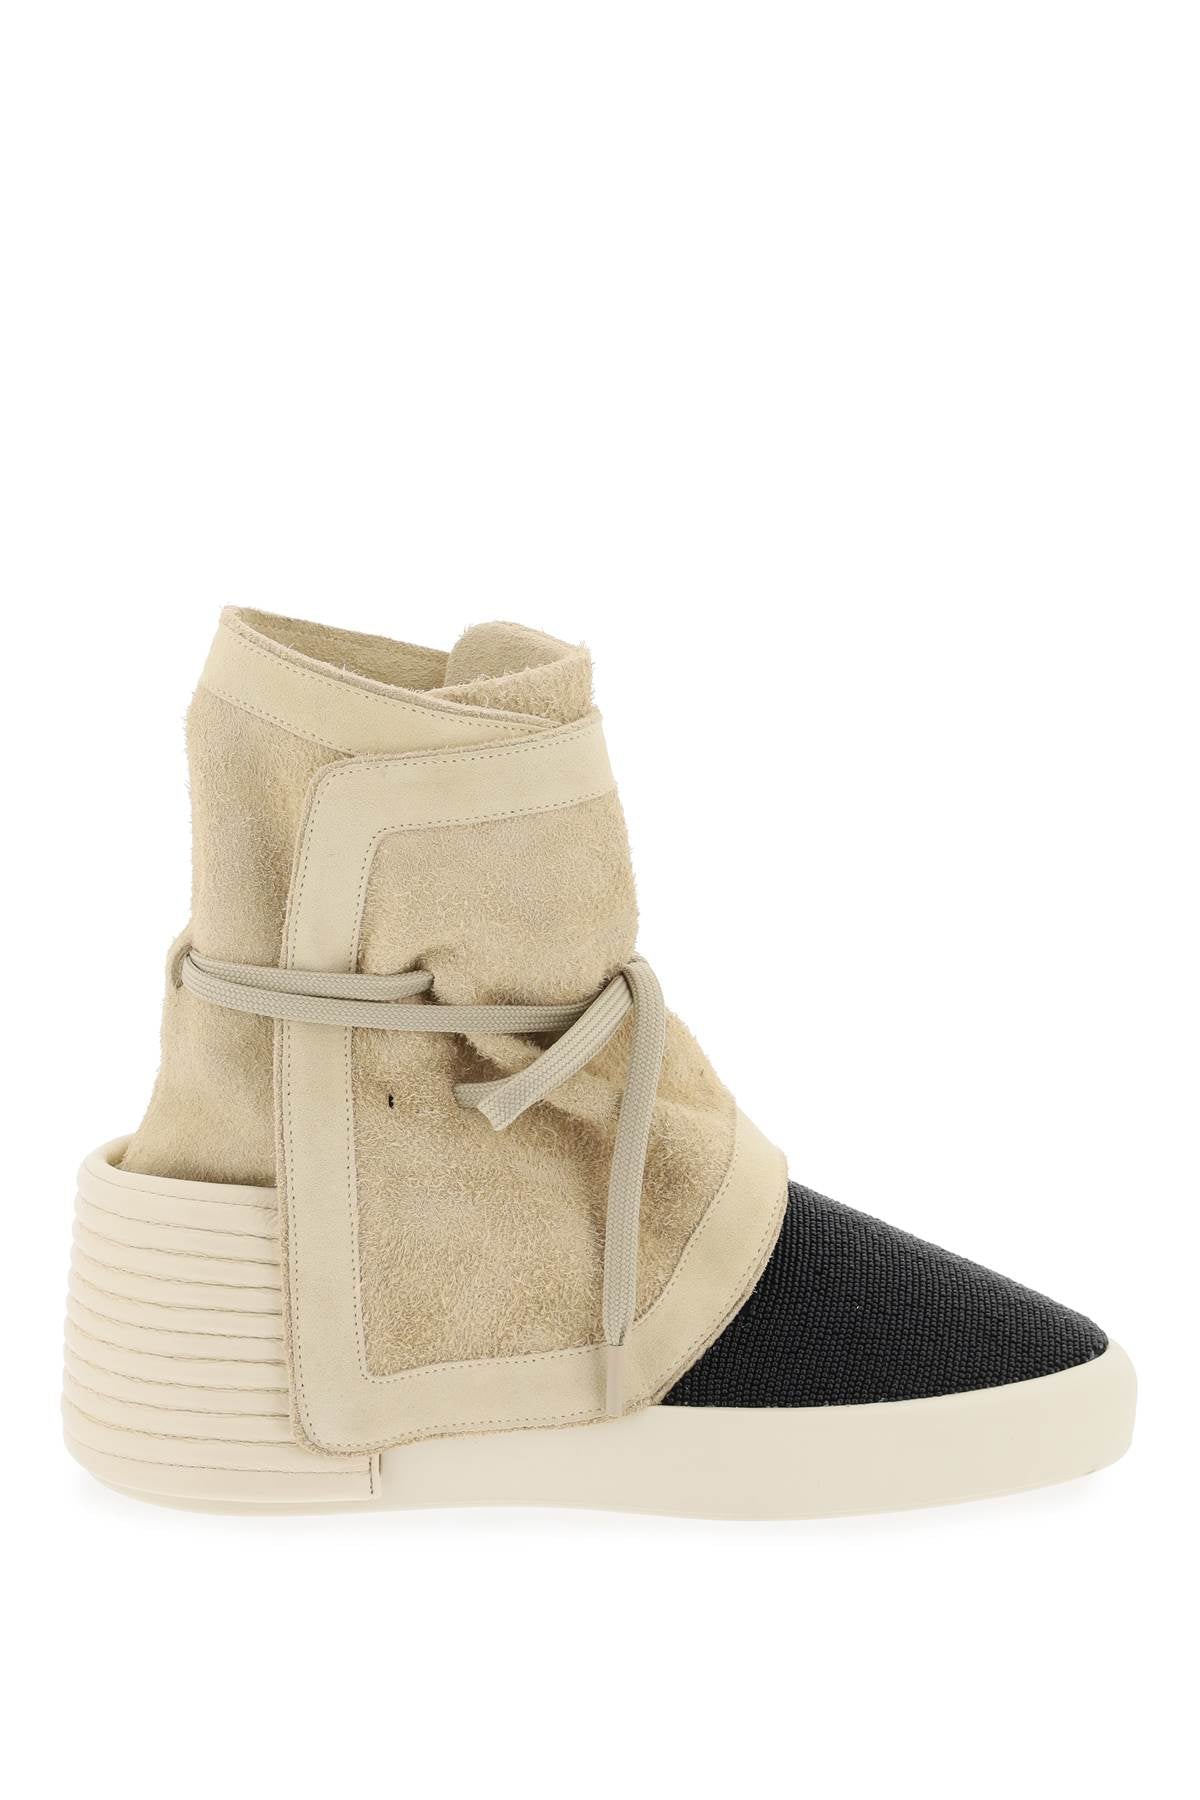 Fear of god high-top suede and beaded leather moc-0